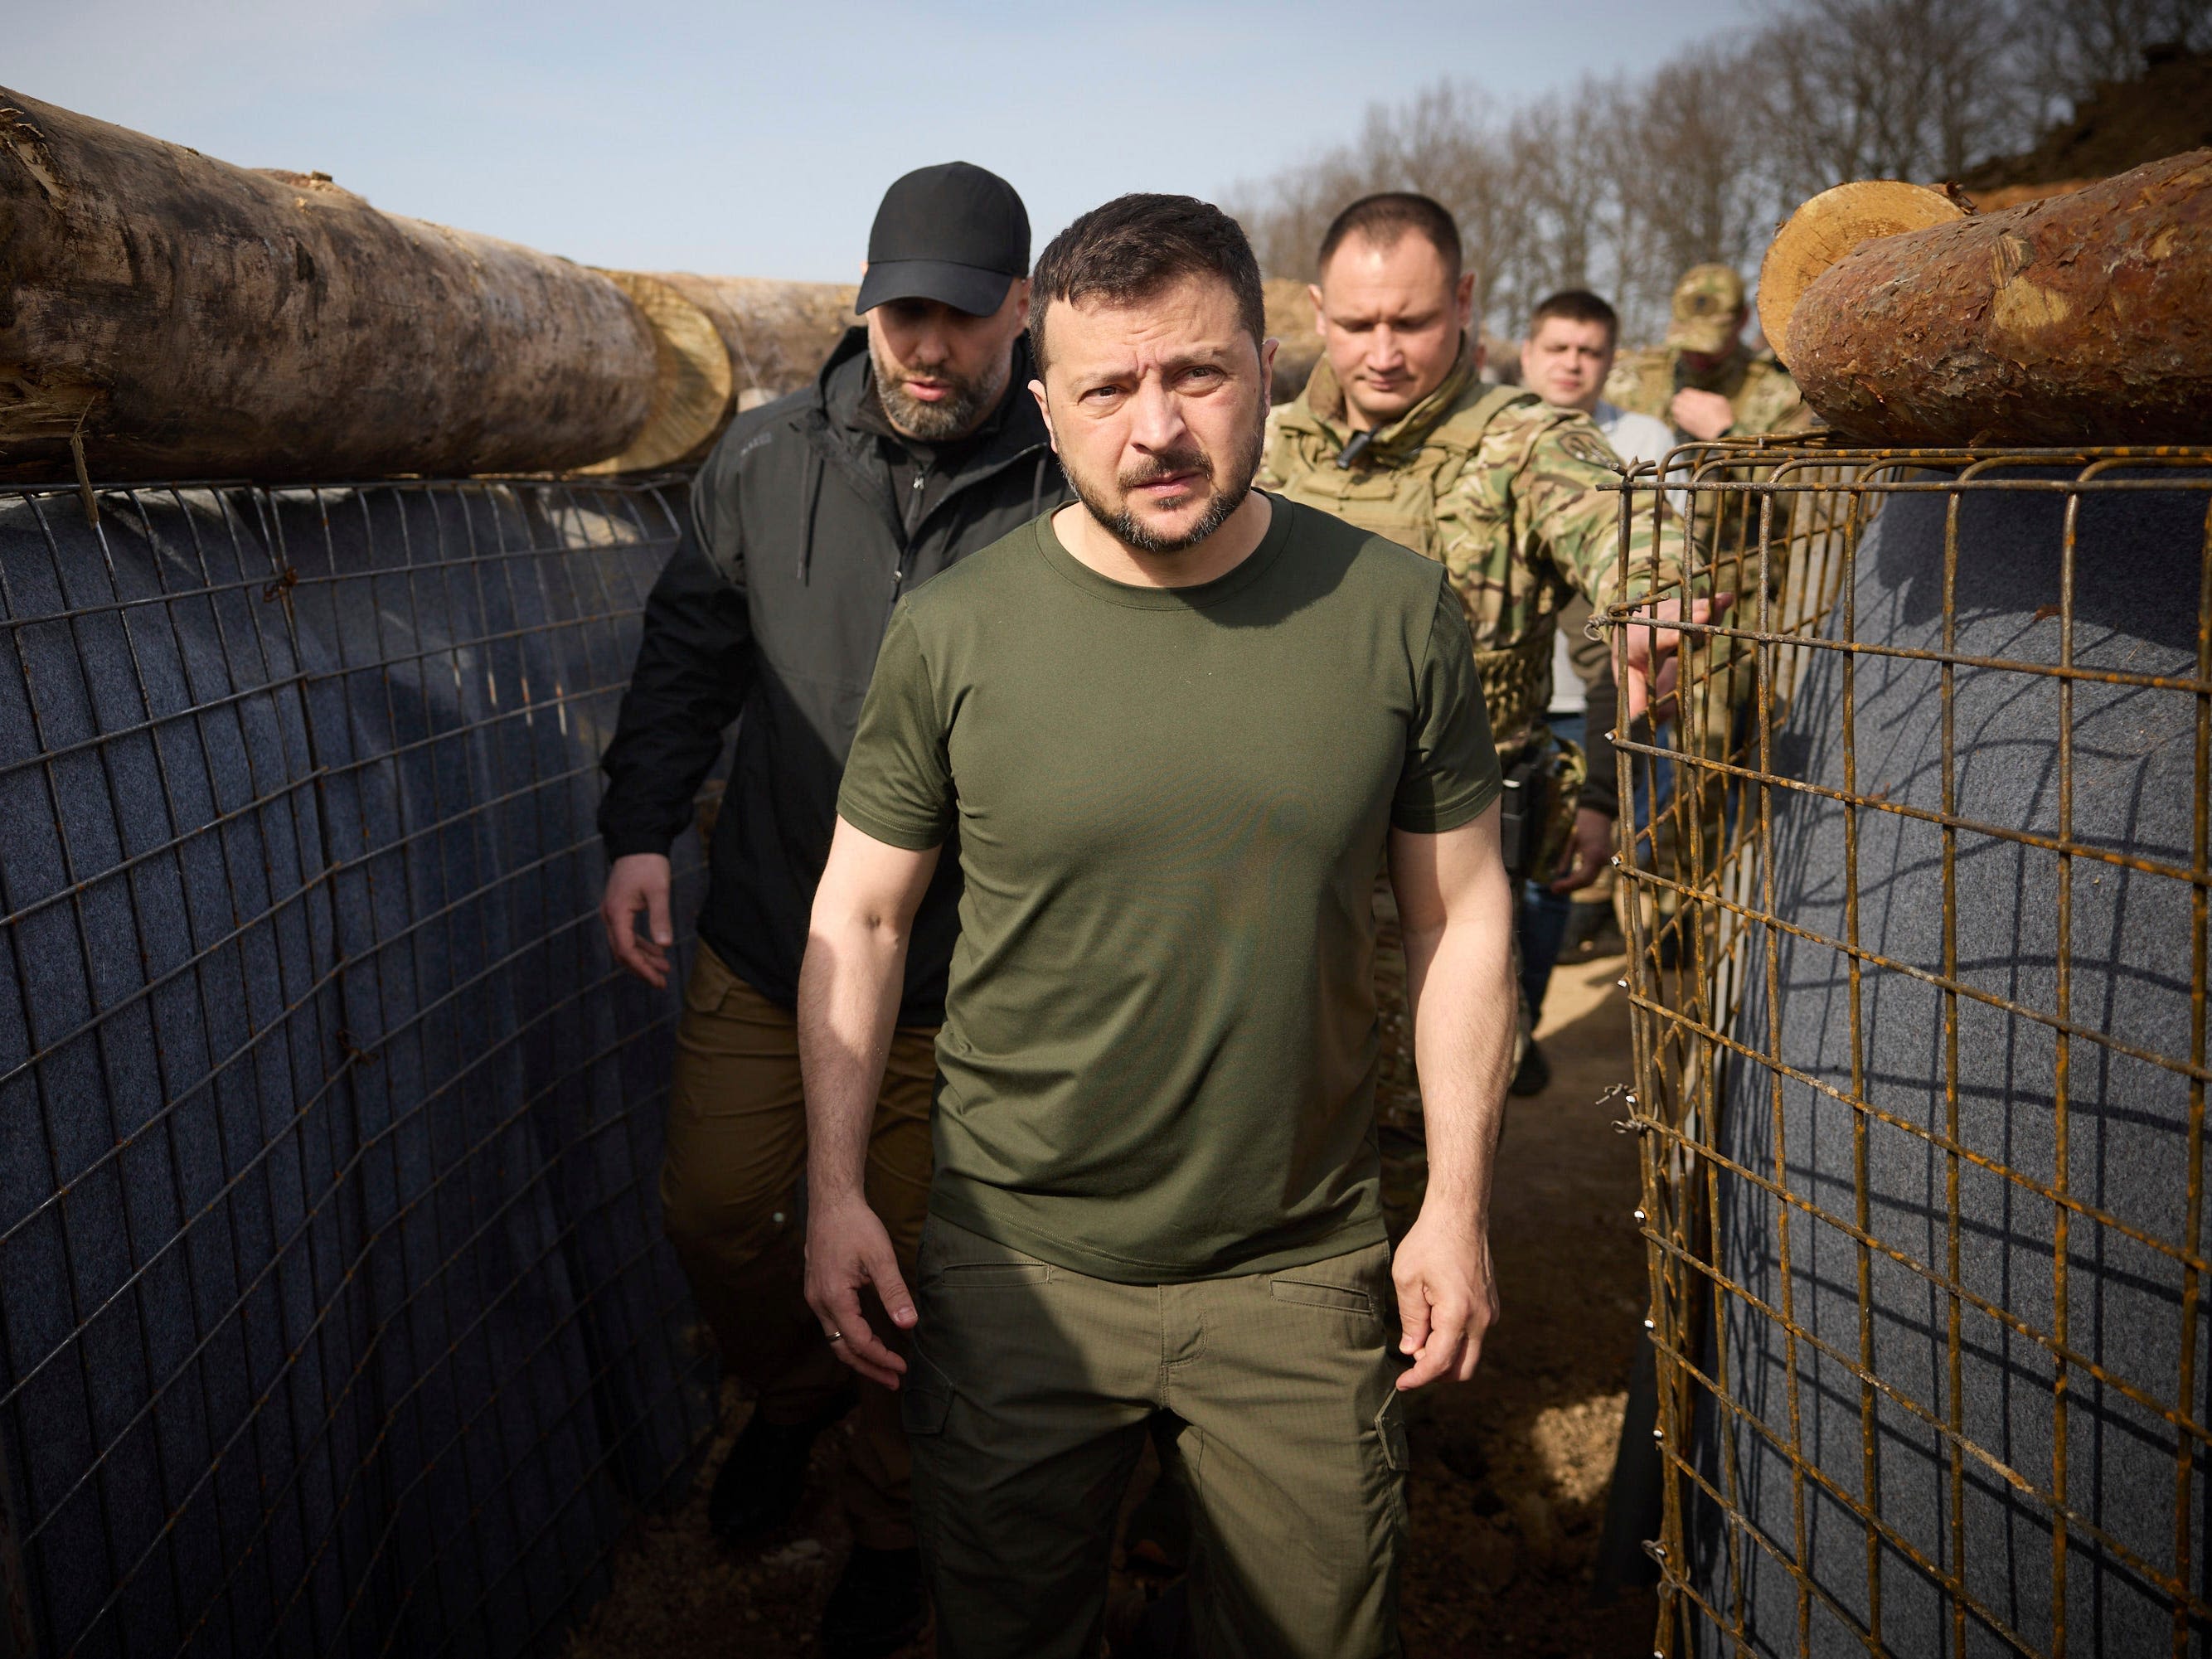 An alleged plot to assassinate Zelenskyy gives an alarming look into how deeply Russia can penetrate his inner circle